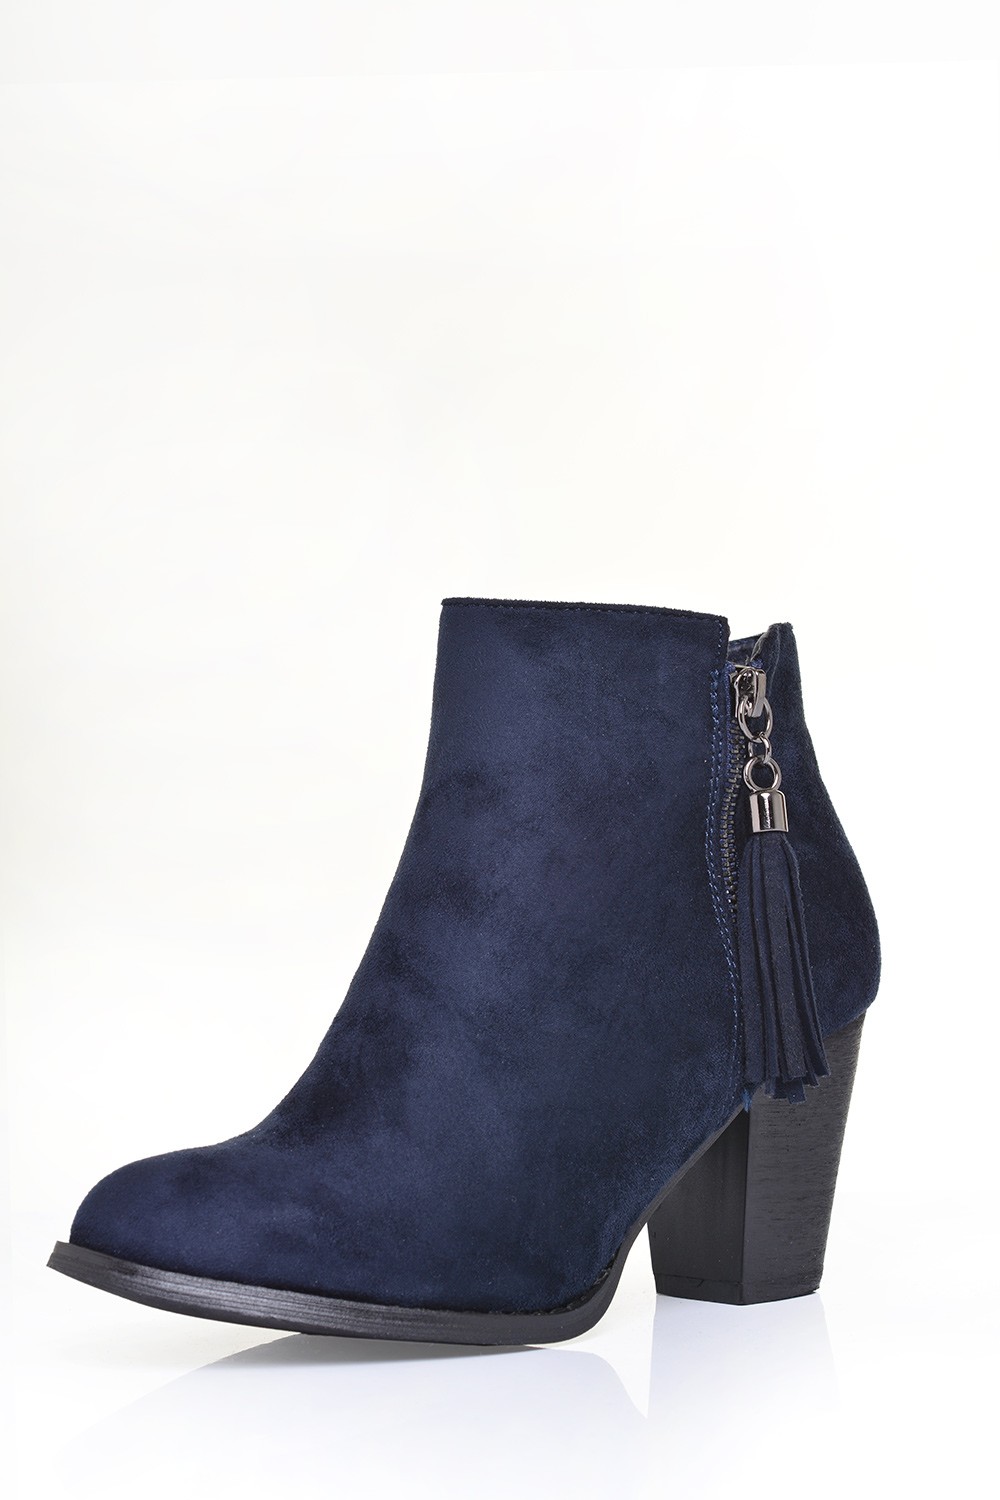 Sole City Katron Ankle Boot in Navy Suede | iCLOTHING